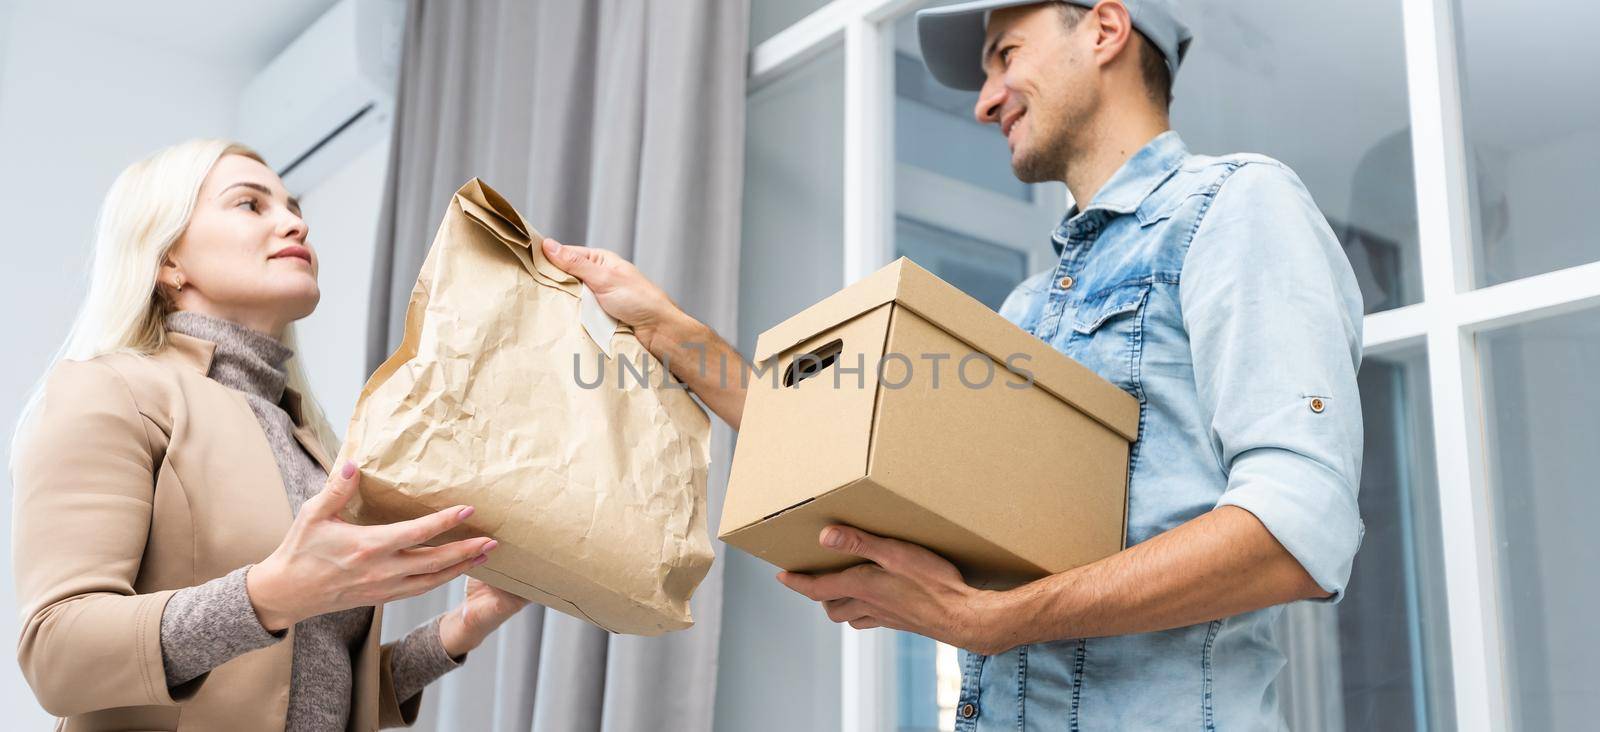 woman receiving package from delivery man.